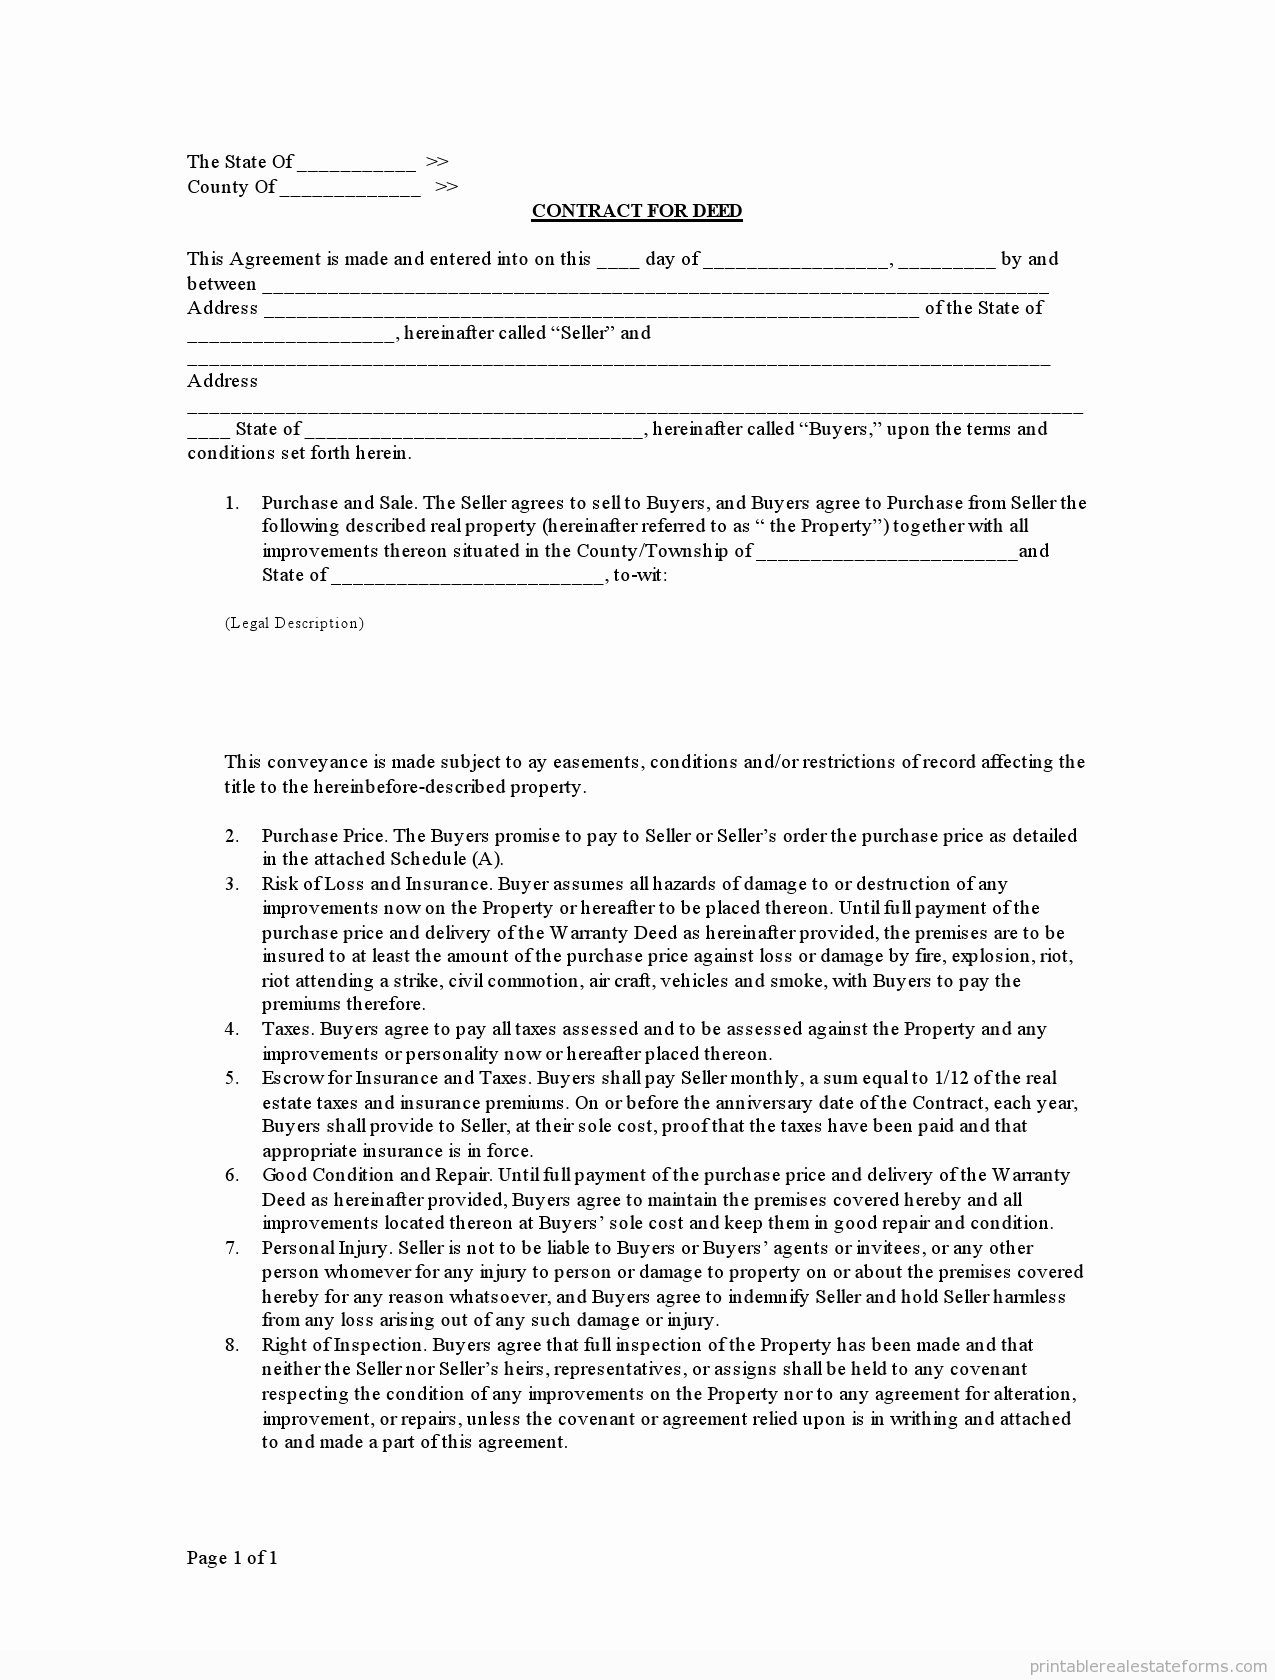 Free Land Contract Template Best Of Free Printable Contract for Deed form Basic Templates